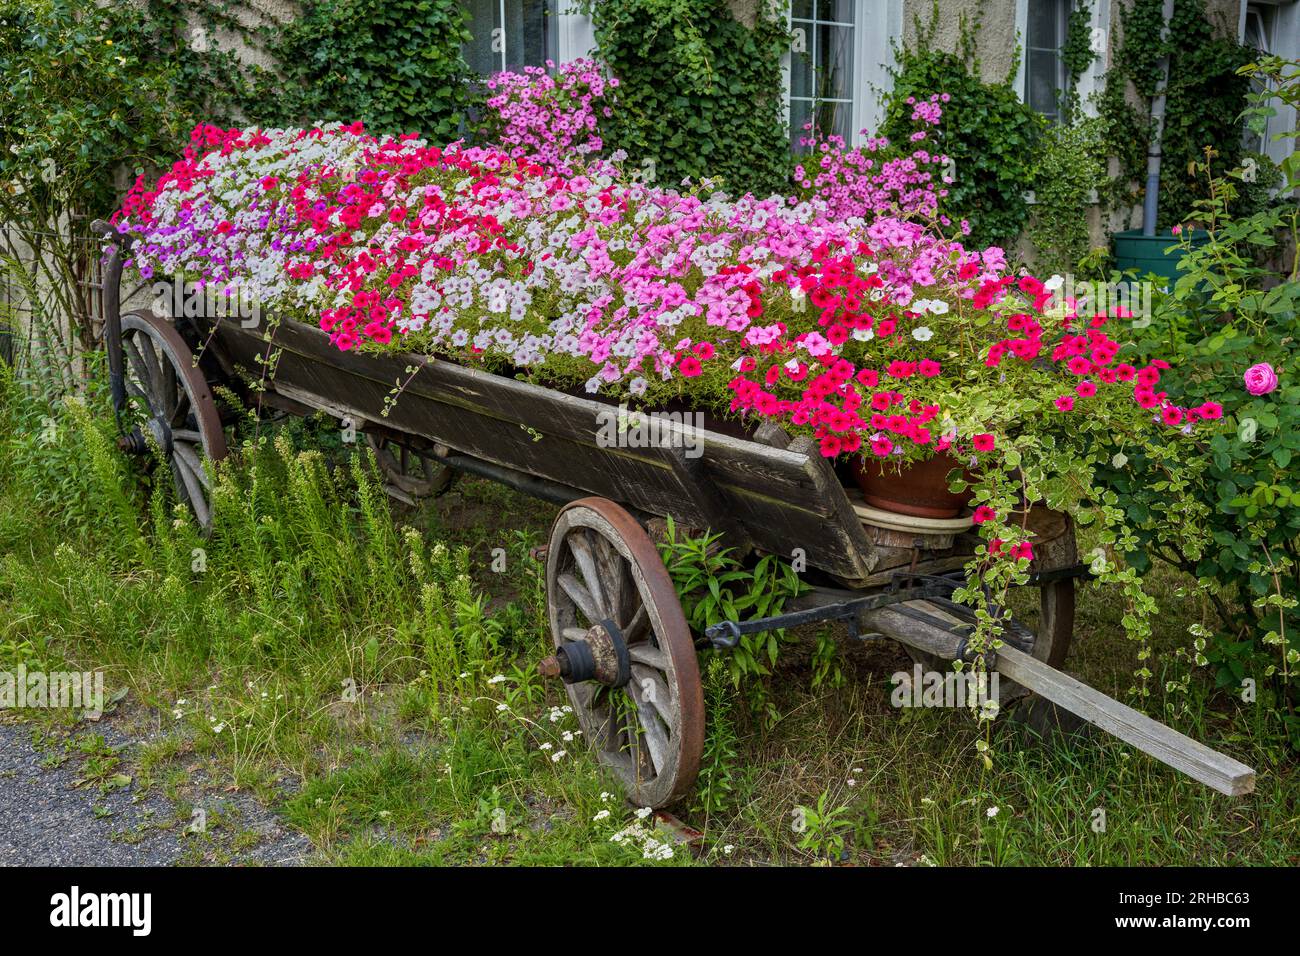 old wooden horse cart full of blooming multicolored petunias Stock Photo